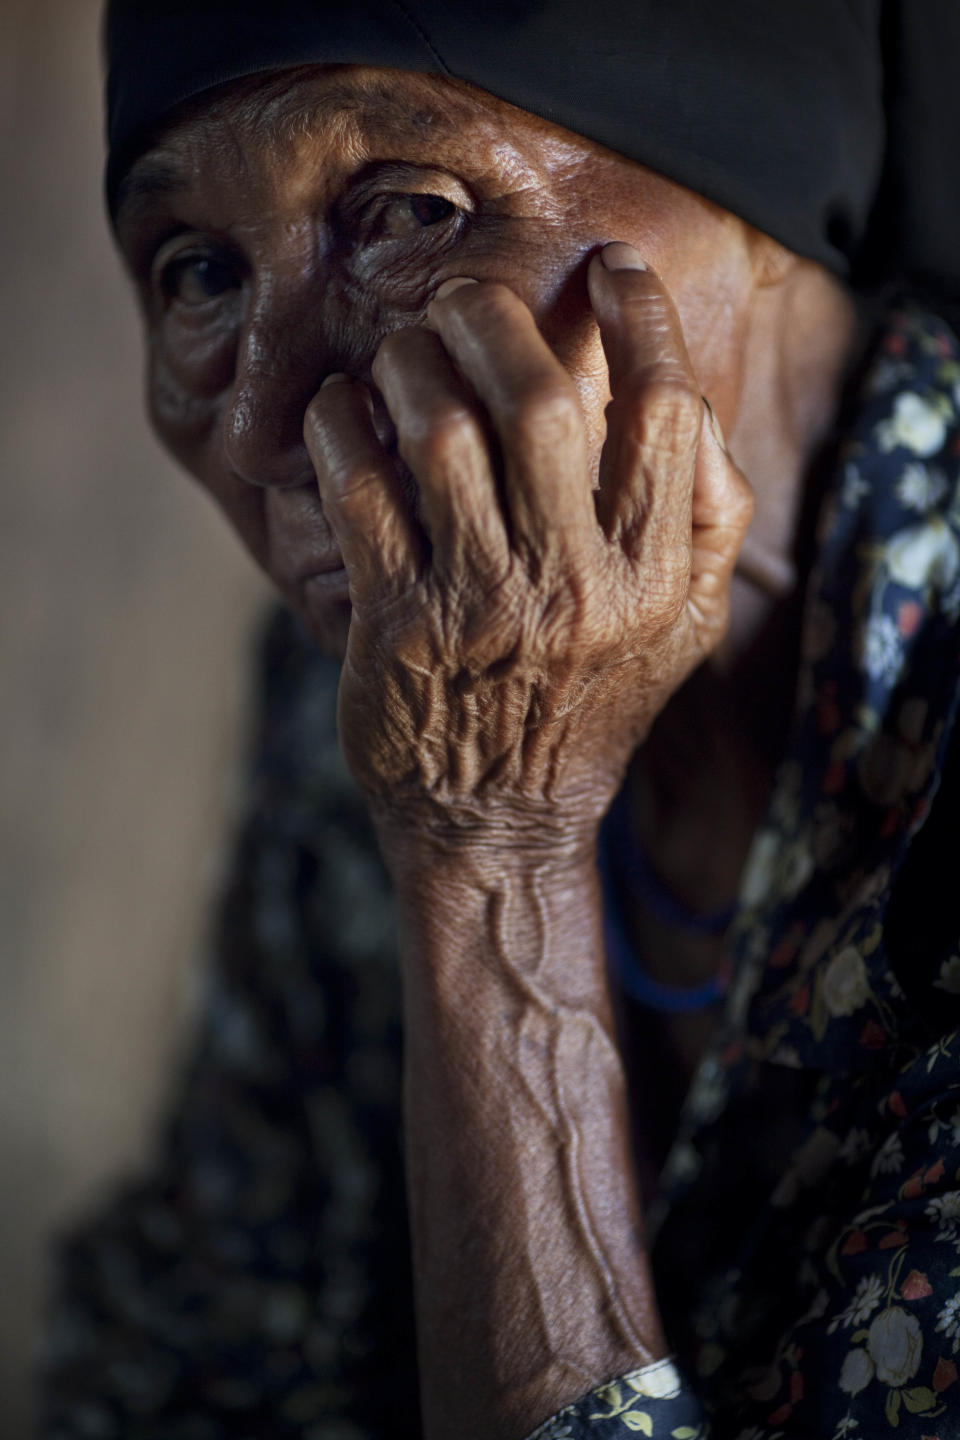 Rosela Zelaya Valderramoi, 70, rests inside her house in the Paptalaya pier, where helicopters of a joint Honduran-U.S. drug raid landed last Friday, in Ahuas, Mosquitia region, Honduras, Monday, May 21, 2012. On Friday May 11, a helicopter mission with advisers from the DEA, appears to have mistakenly targeted civilians in the remote jungle area, killing four riverboat passengers and injuring four others. Later, according to villagers, Honduran police narcotics forces and men speaking English spent hours searching the small town of Ahuas for a suspected drug trafficker.(AP Photo/Rodrigo Abd)